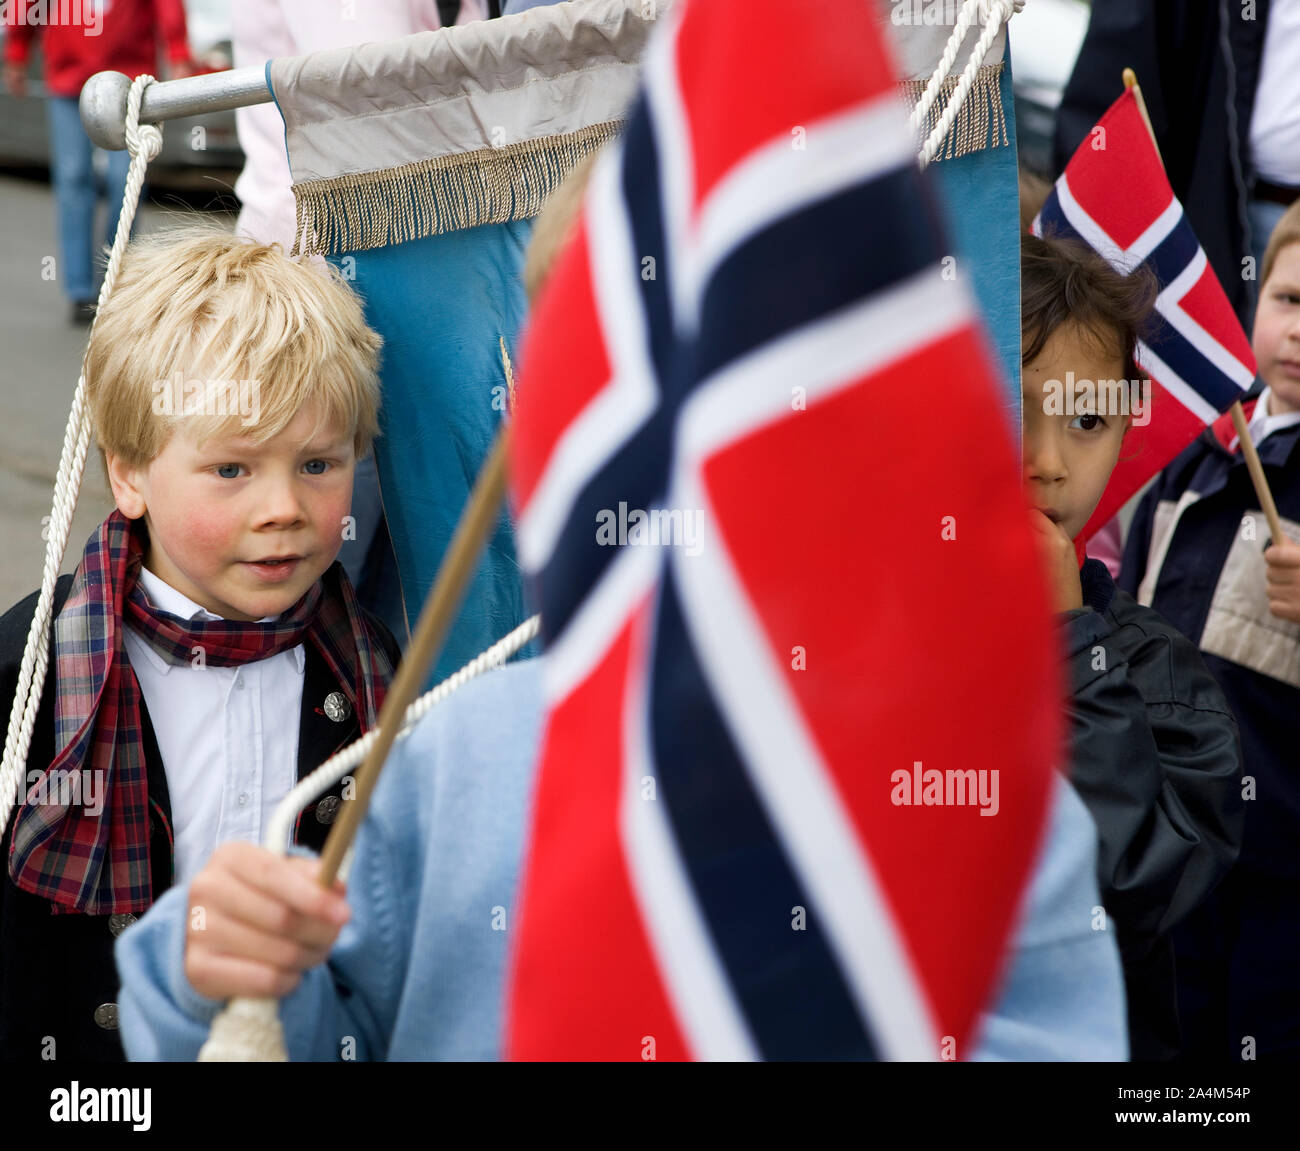 Children celebrating 17th of May in Norway Stock Photo